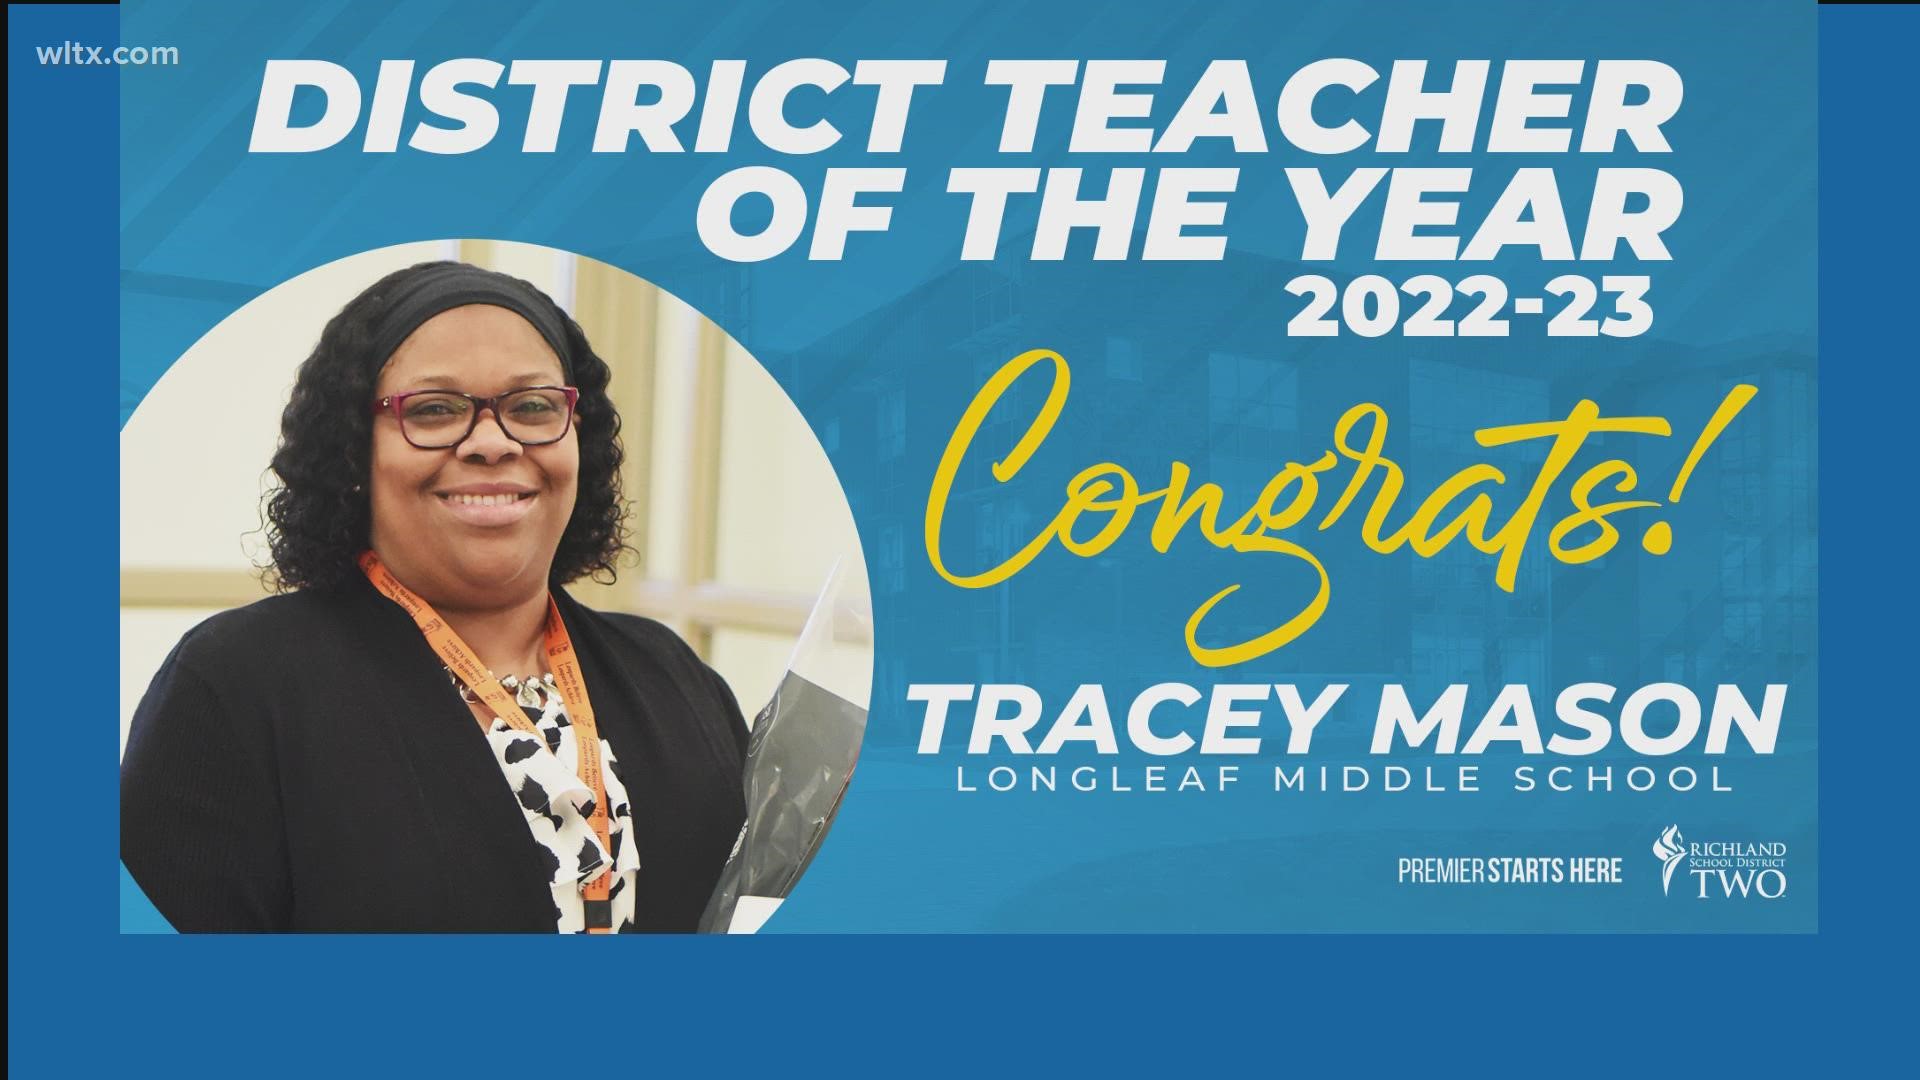 Tracey Mason, a 7th-grade math teacher and math department chair at Longleaf Middle School is Richland Two's teacher of the year.